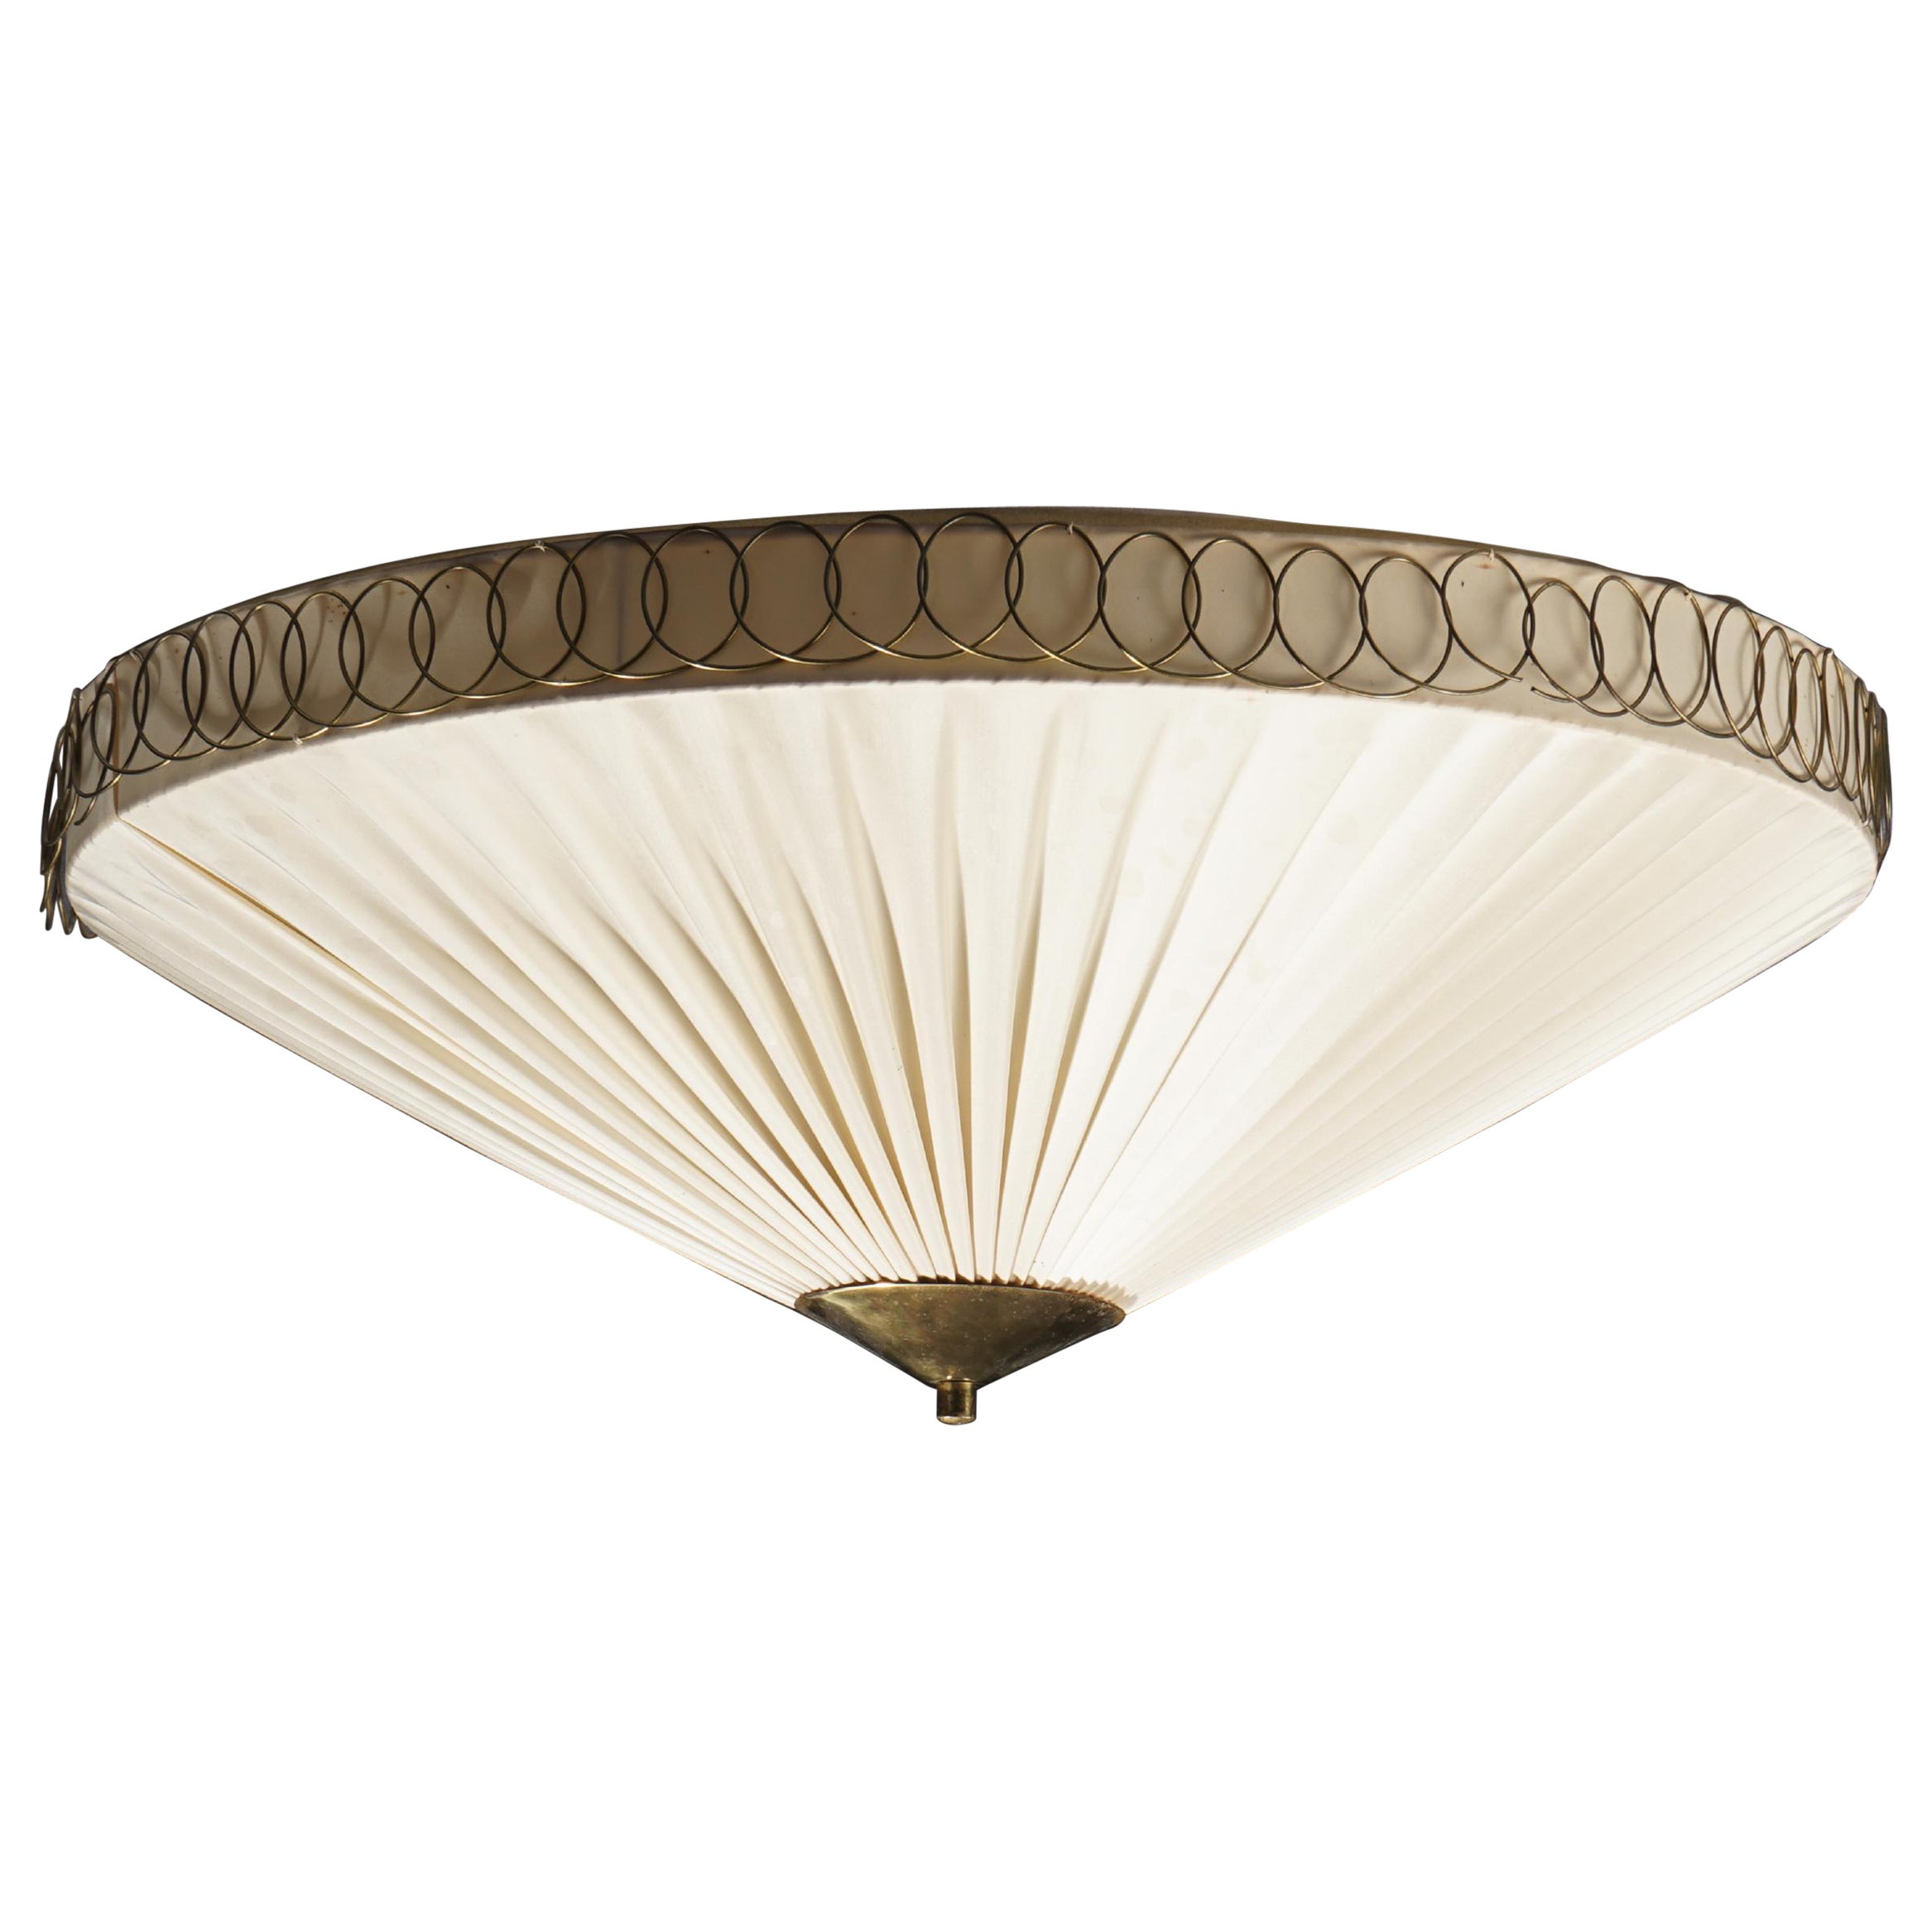 Idman Ceiling Light / Sconce, Finland, 1950s For Sale